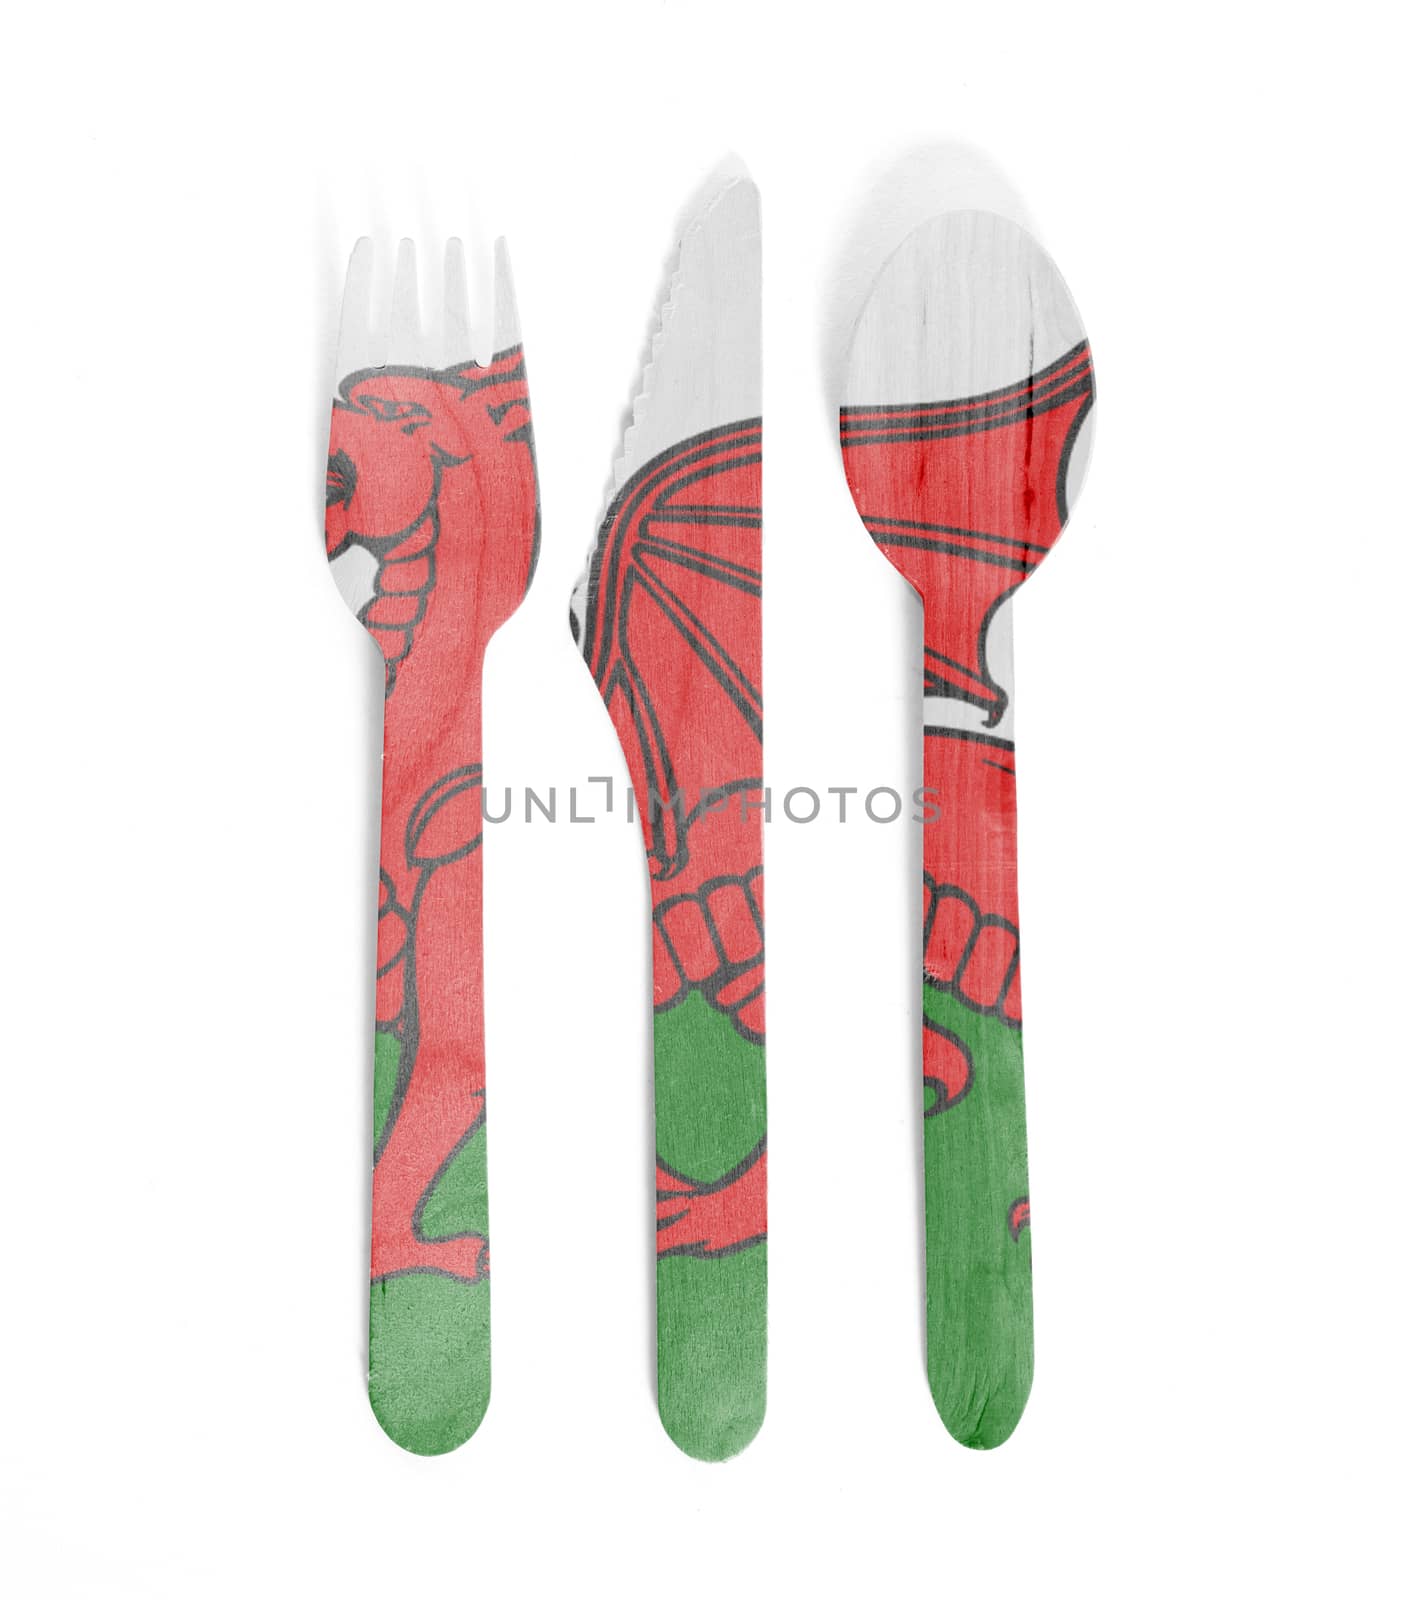 Eco friendly wooden cutlery - Plastic free concept - Flag of Wal by michaklootwijk